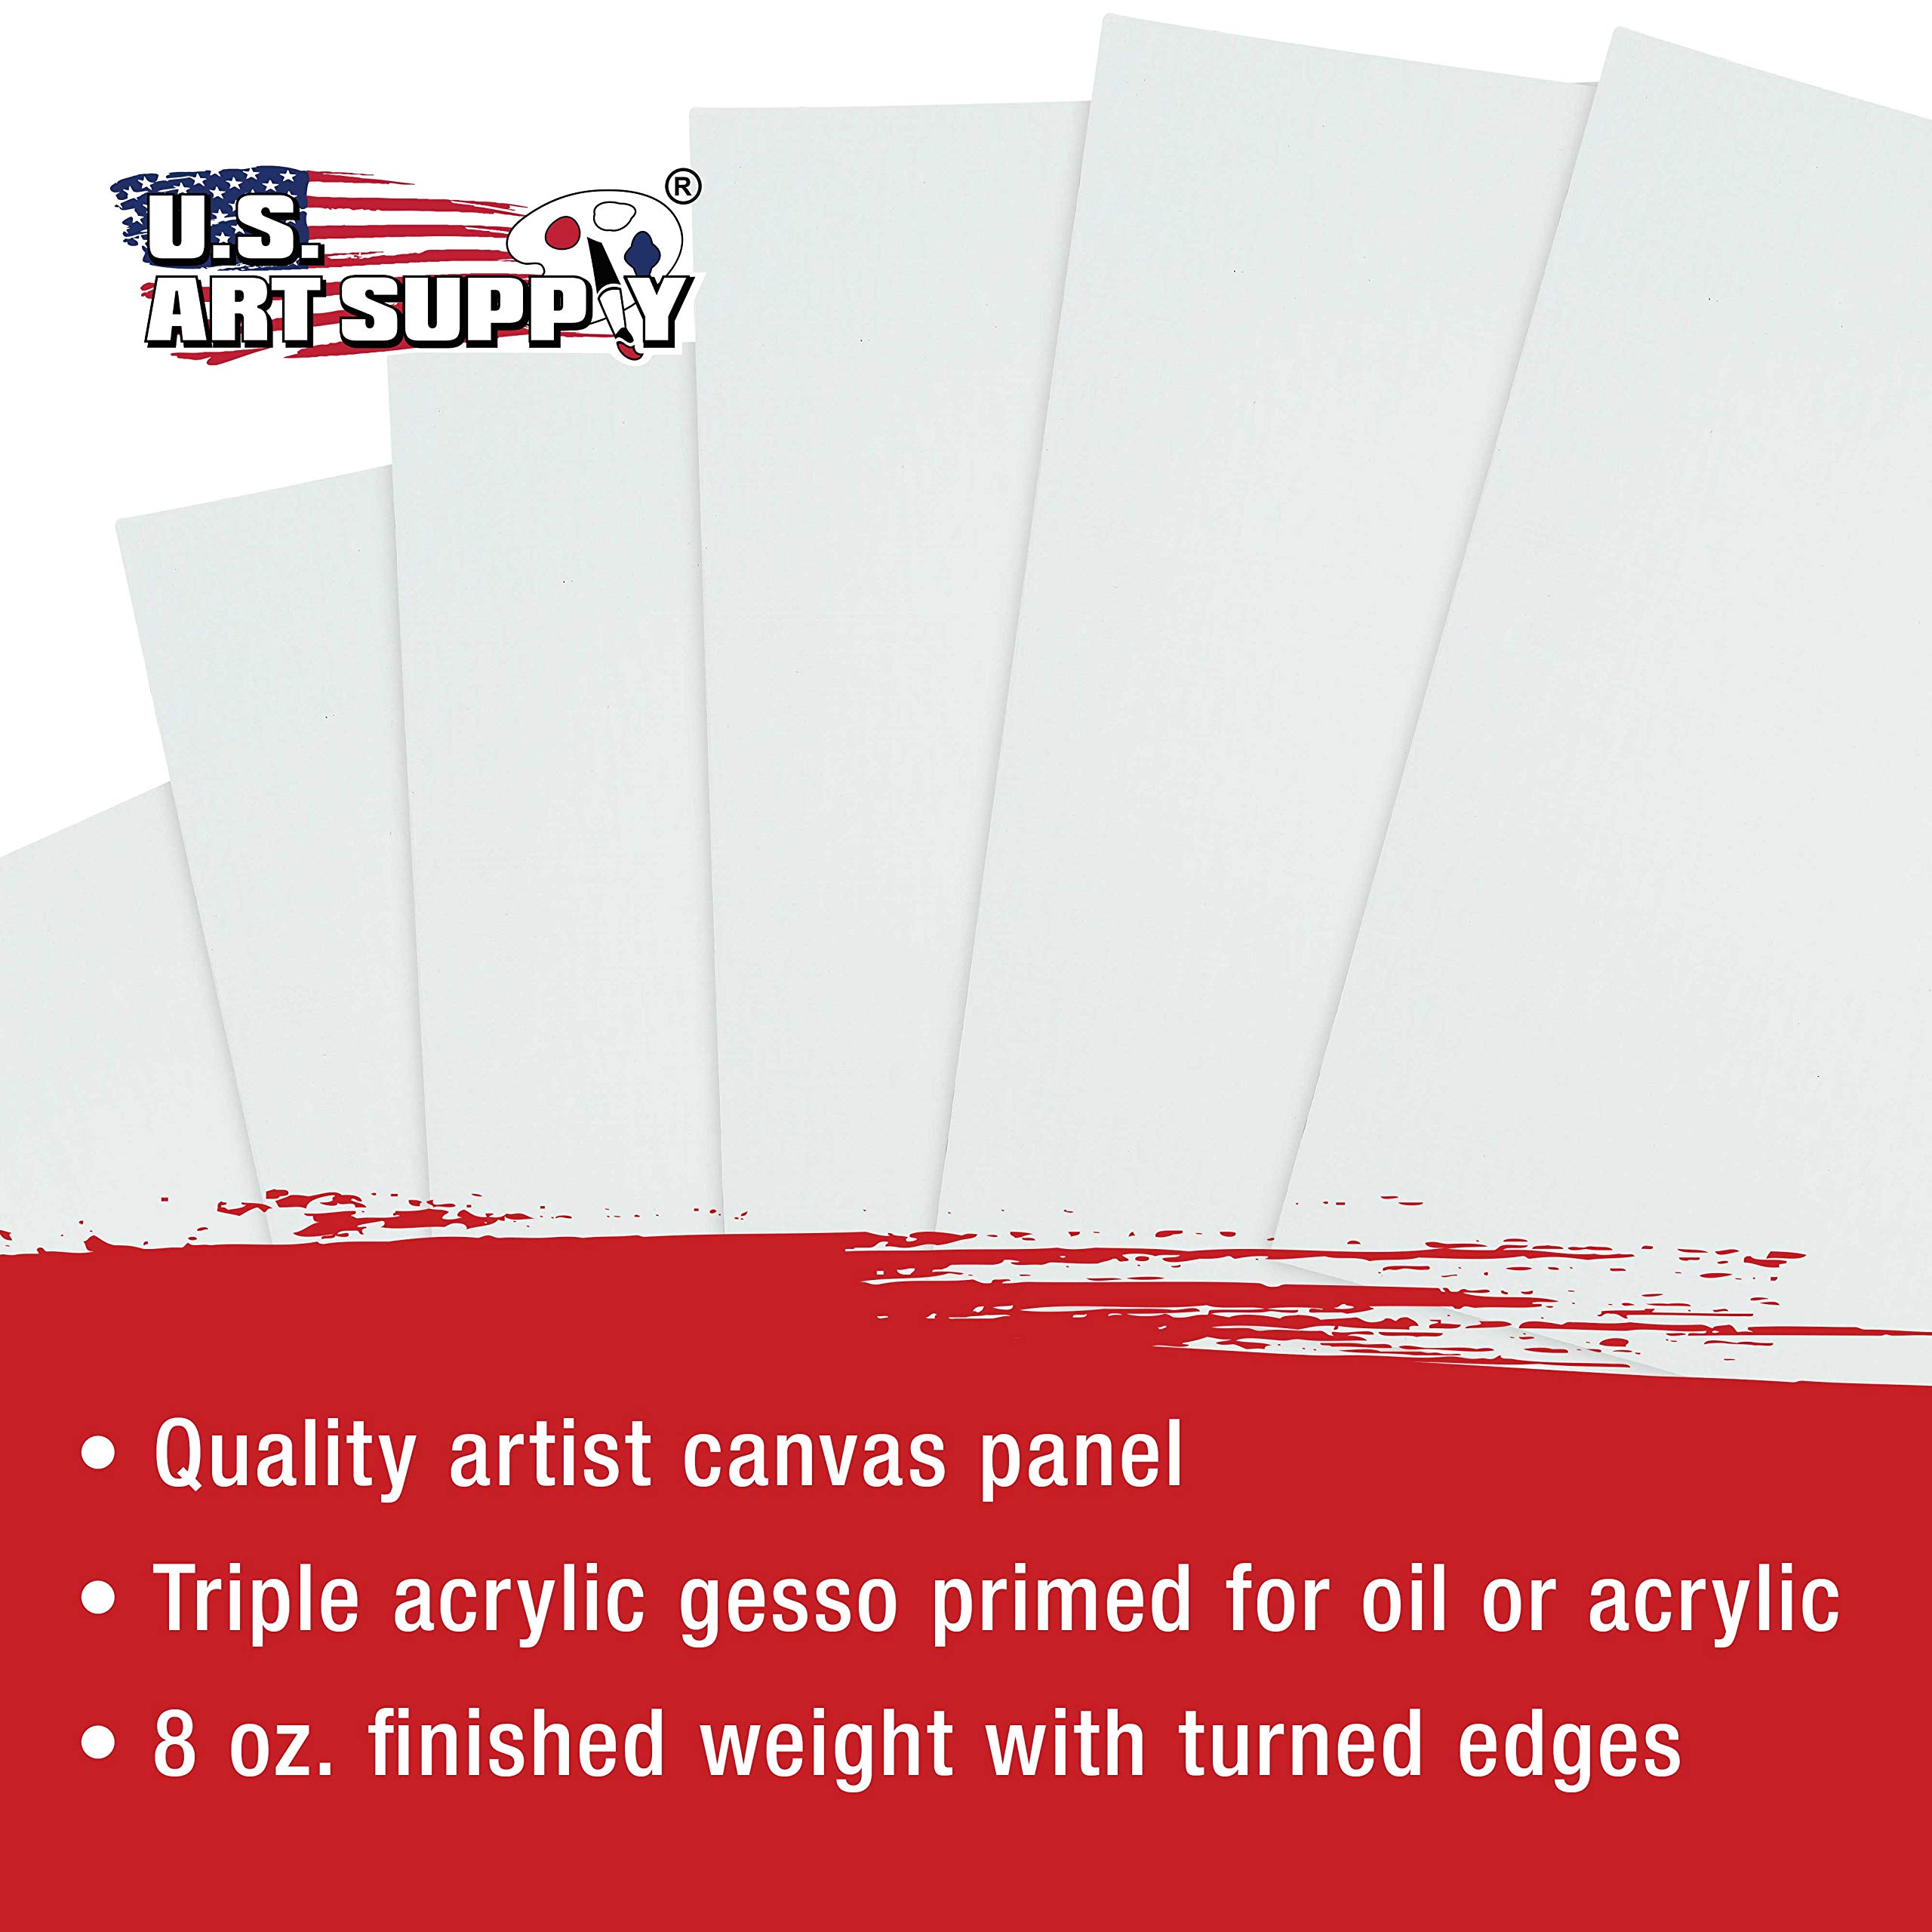 US Art Supply 24-Pack of 8 X 10 inch Professional Artist Quality Acid Free Canvas Panel Boards for Painting Value Pack of 24 (1 Full Case of 24 Single Canvas Board Panels)